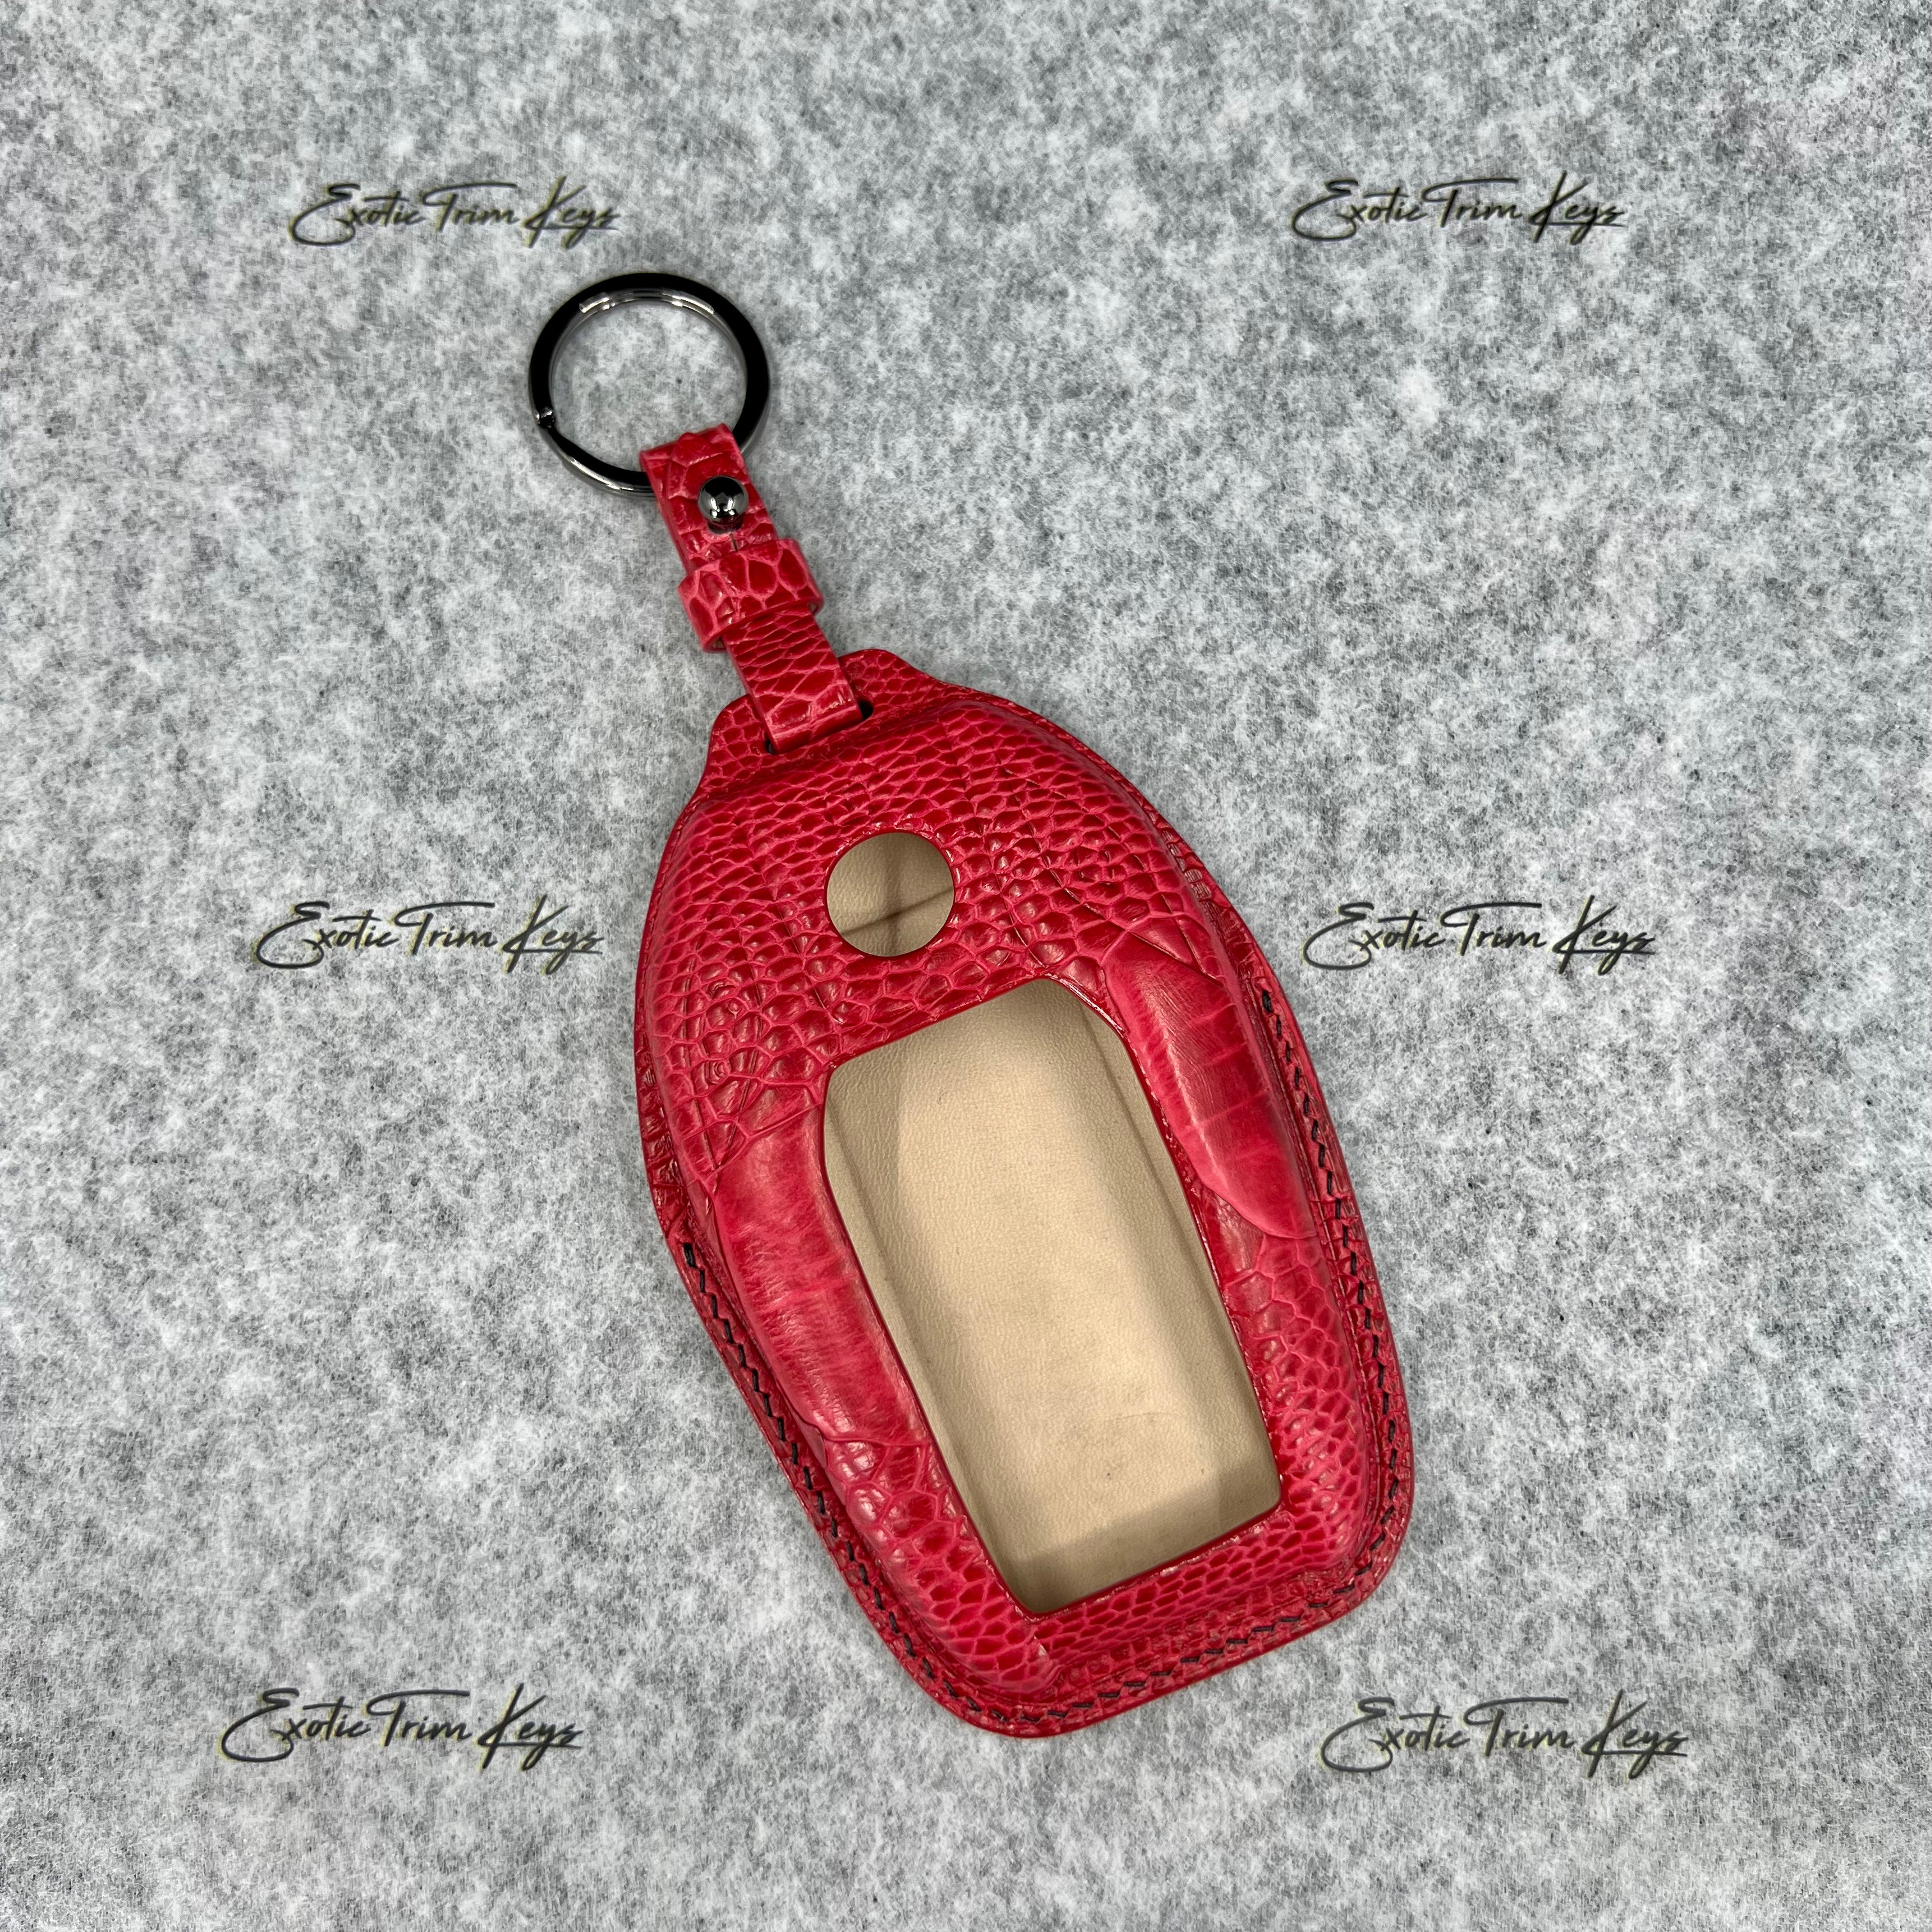 ETK BMW Key Fob Cover - Red Ostrich / Black Stitching - IN STOCK